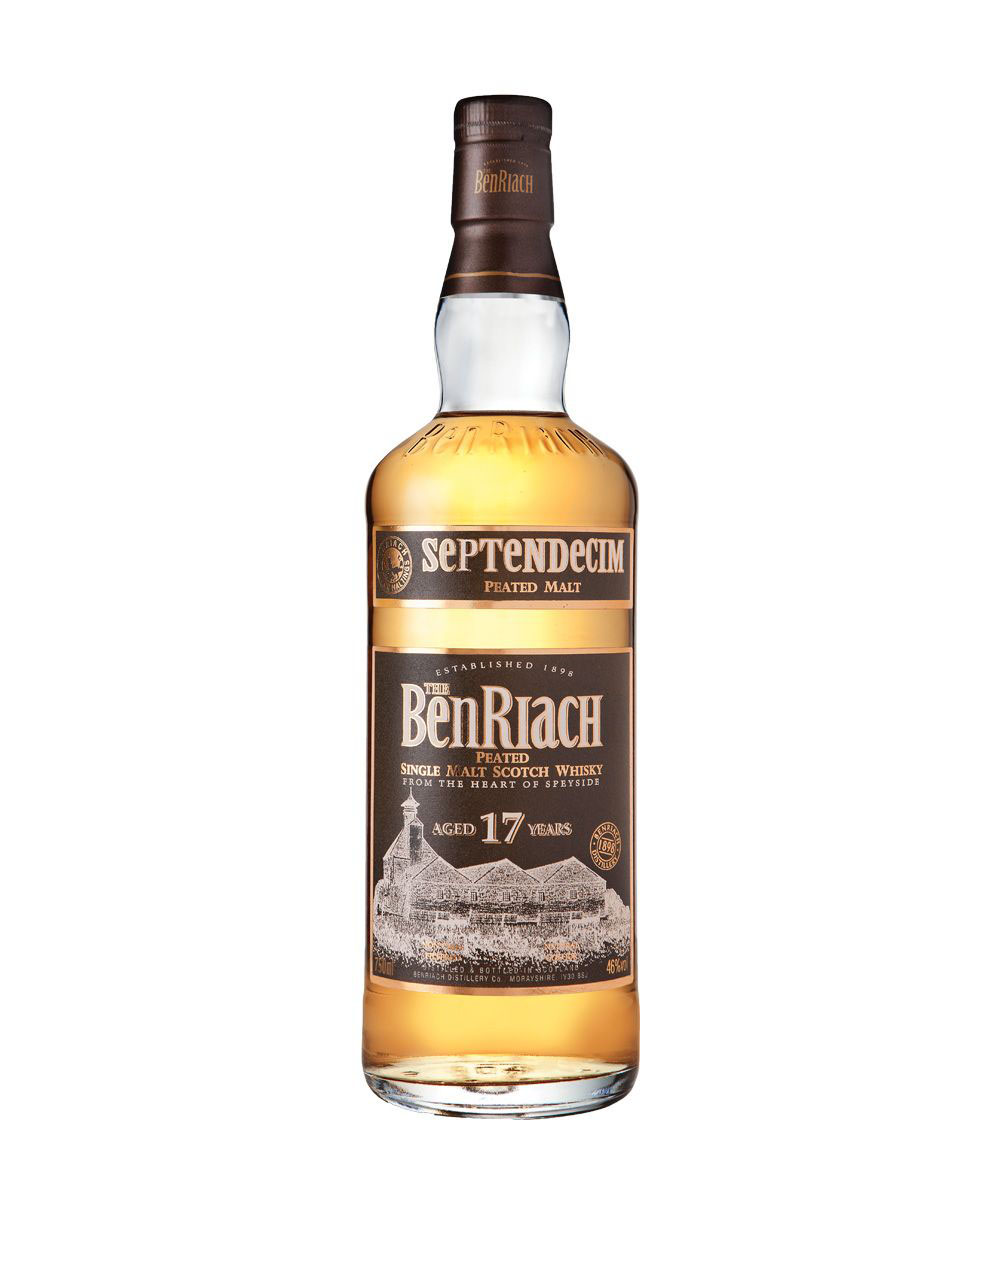 The BenRiach 17 Year Old Septendecim